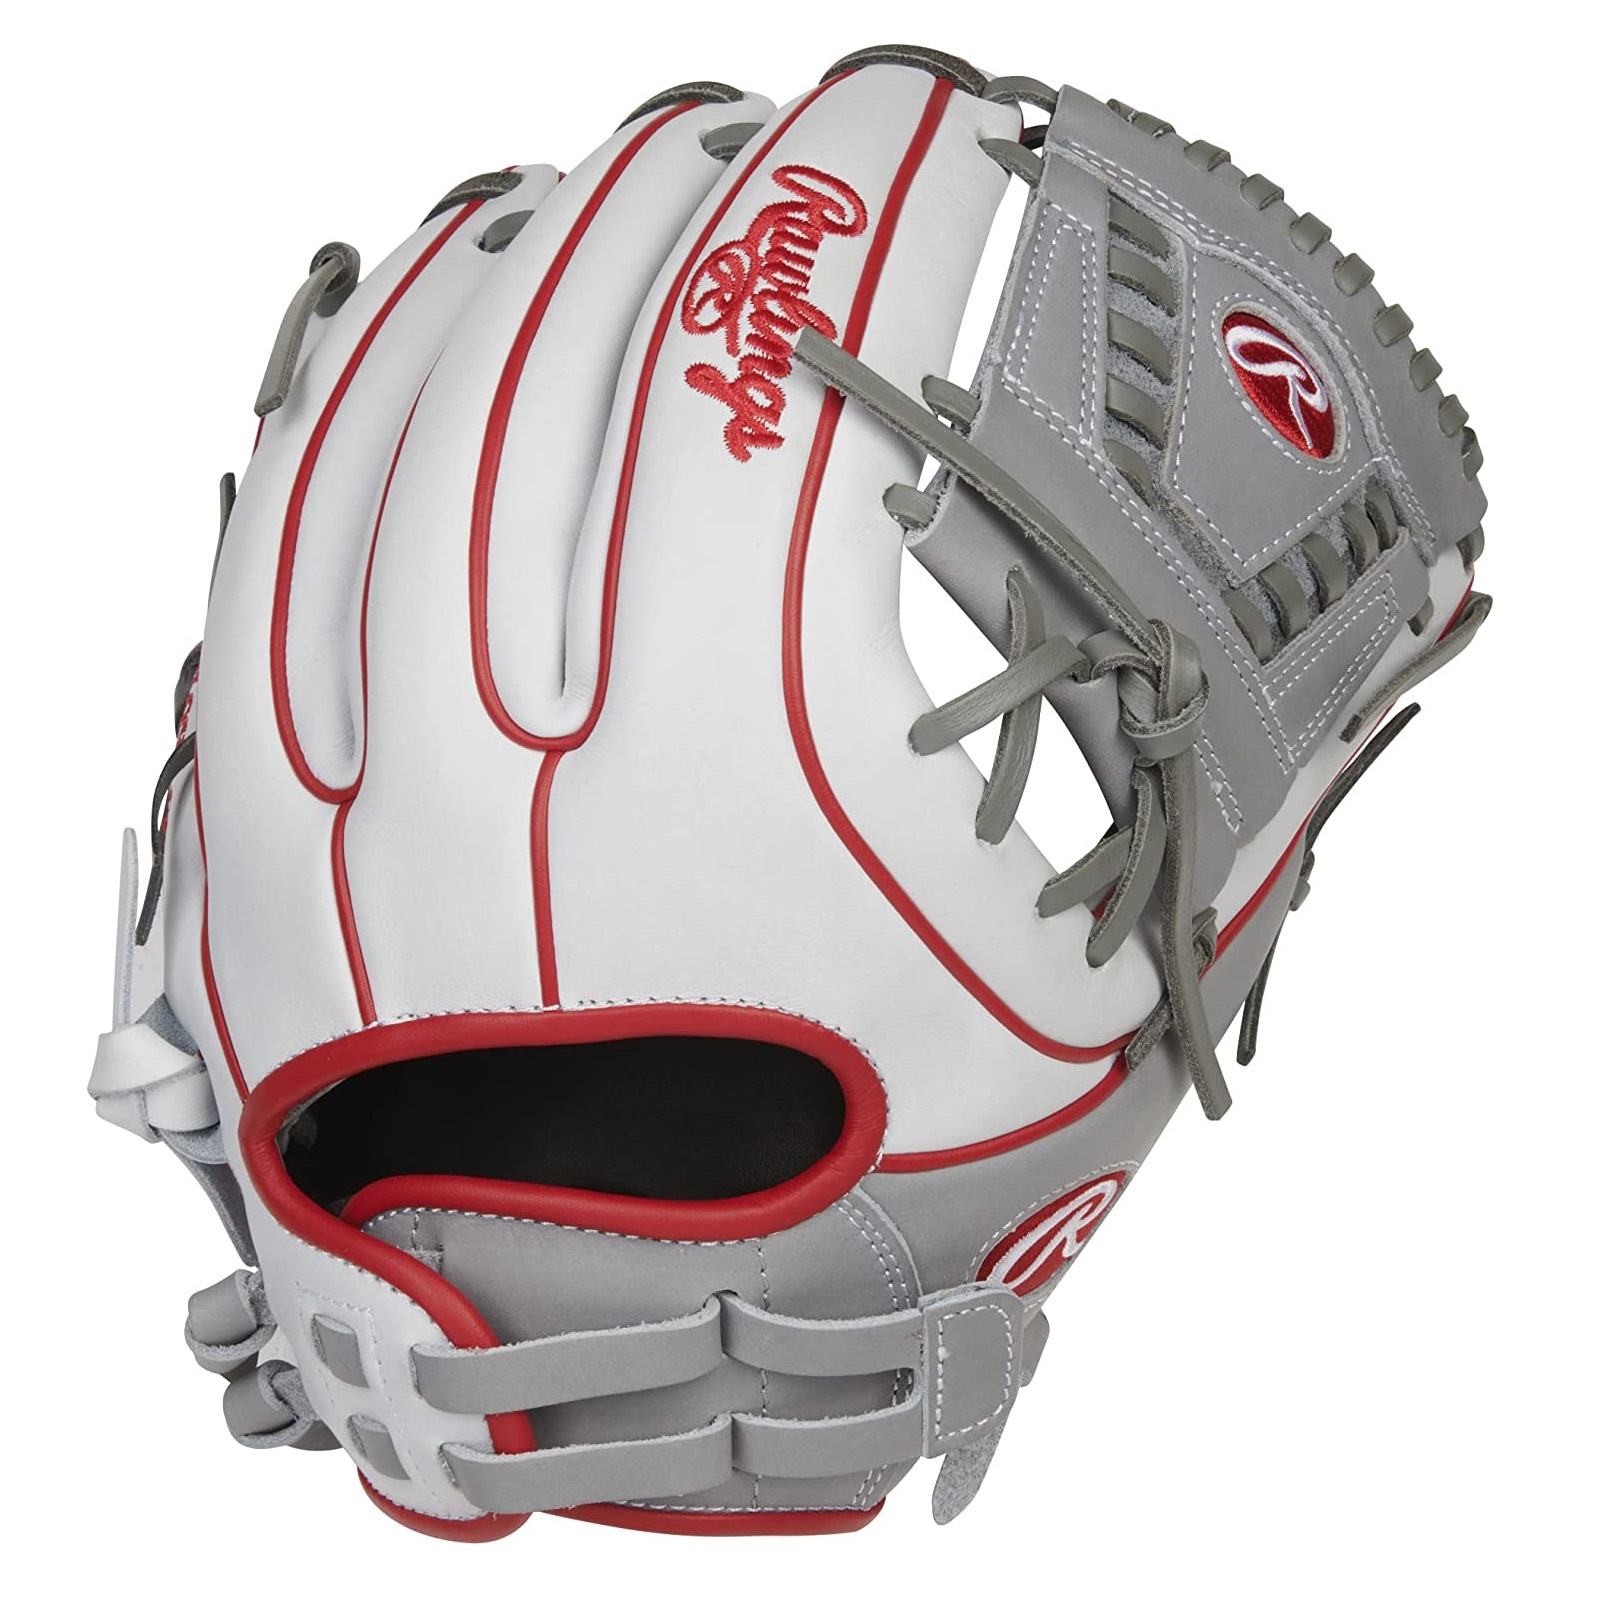 rawlings-heart-of-the-hide-softball-glove-12-laced-1-piece-web-right-hand-throw PRO716SB-31WG-RightHandThrow Rawlings  <p><span style=font-size large;>The Heart of the Hide fastpitch softball gloves from